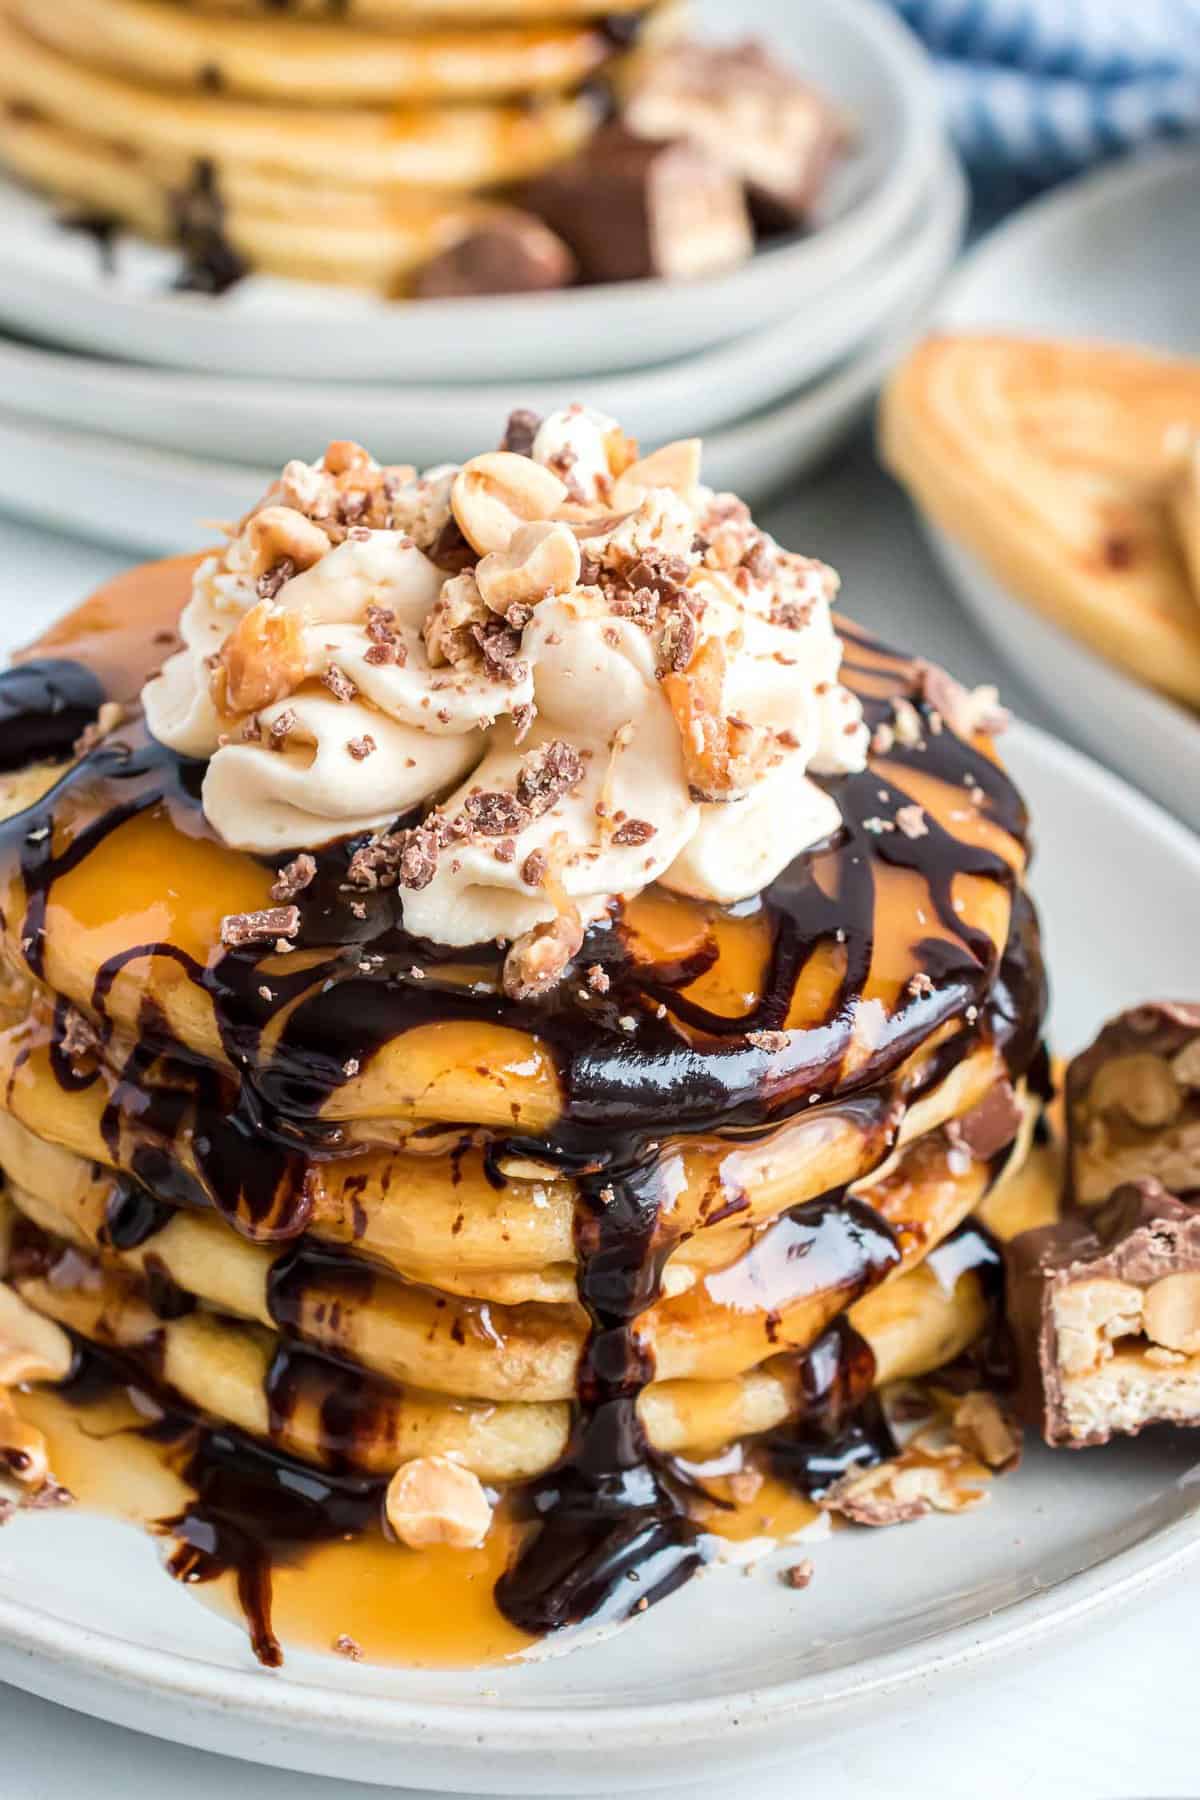 Snickers pancakes with caramel and chocolate sauce.